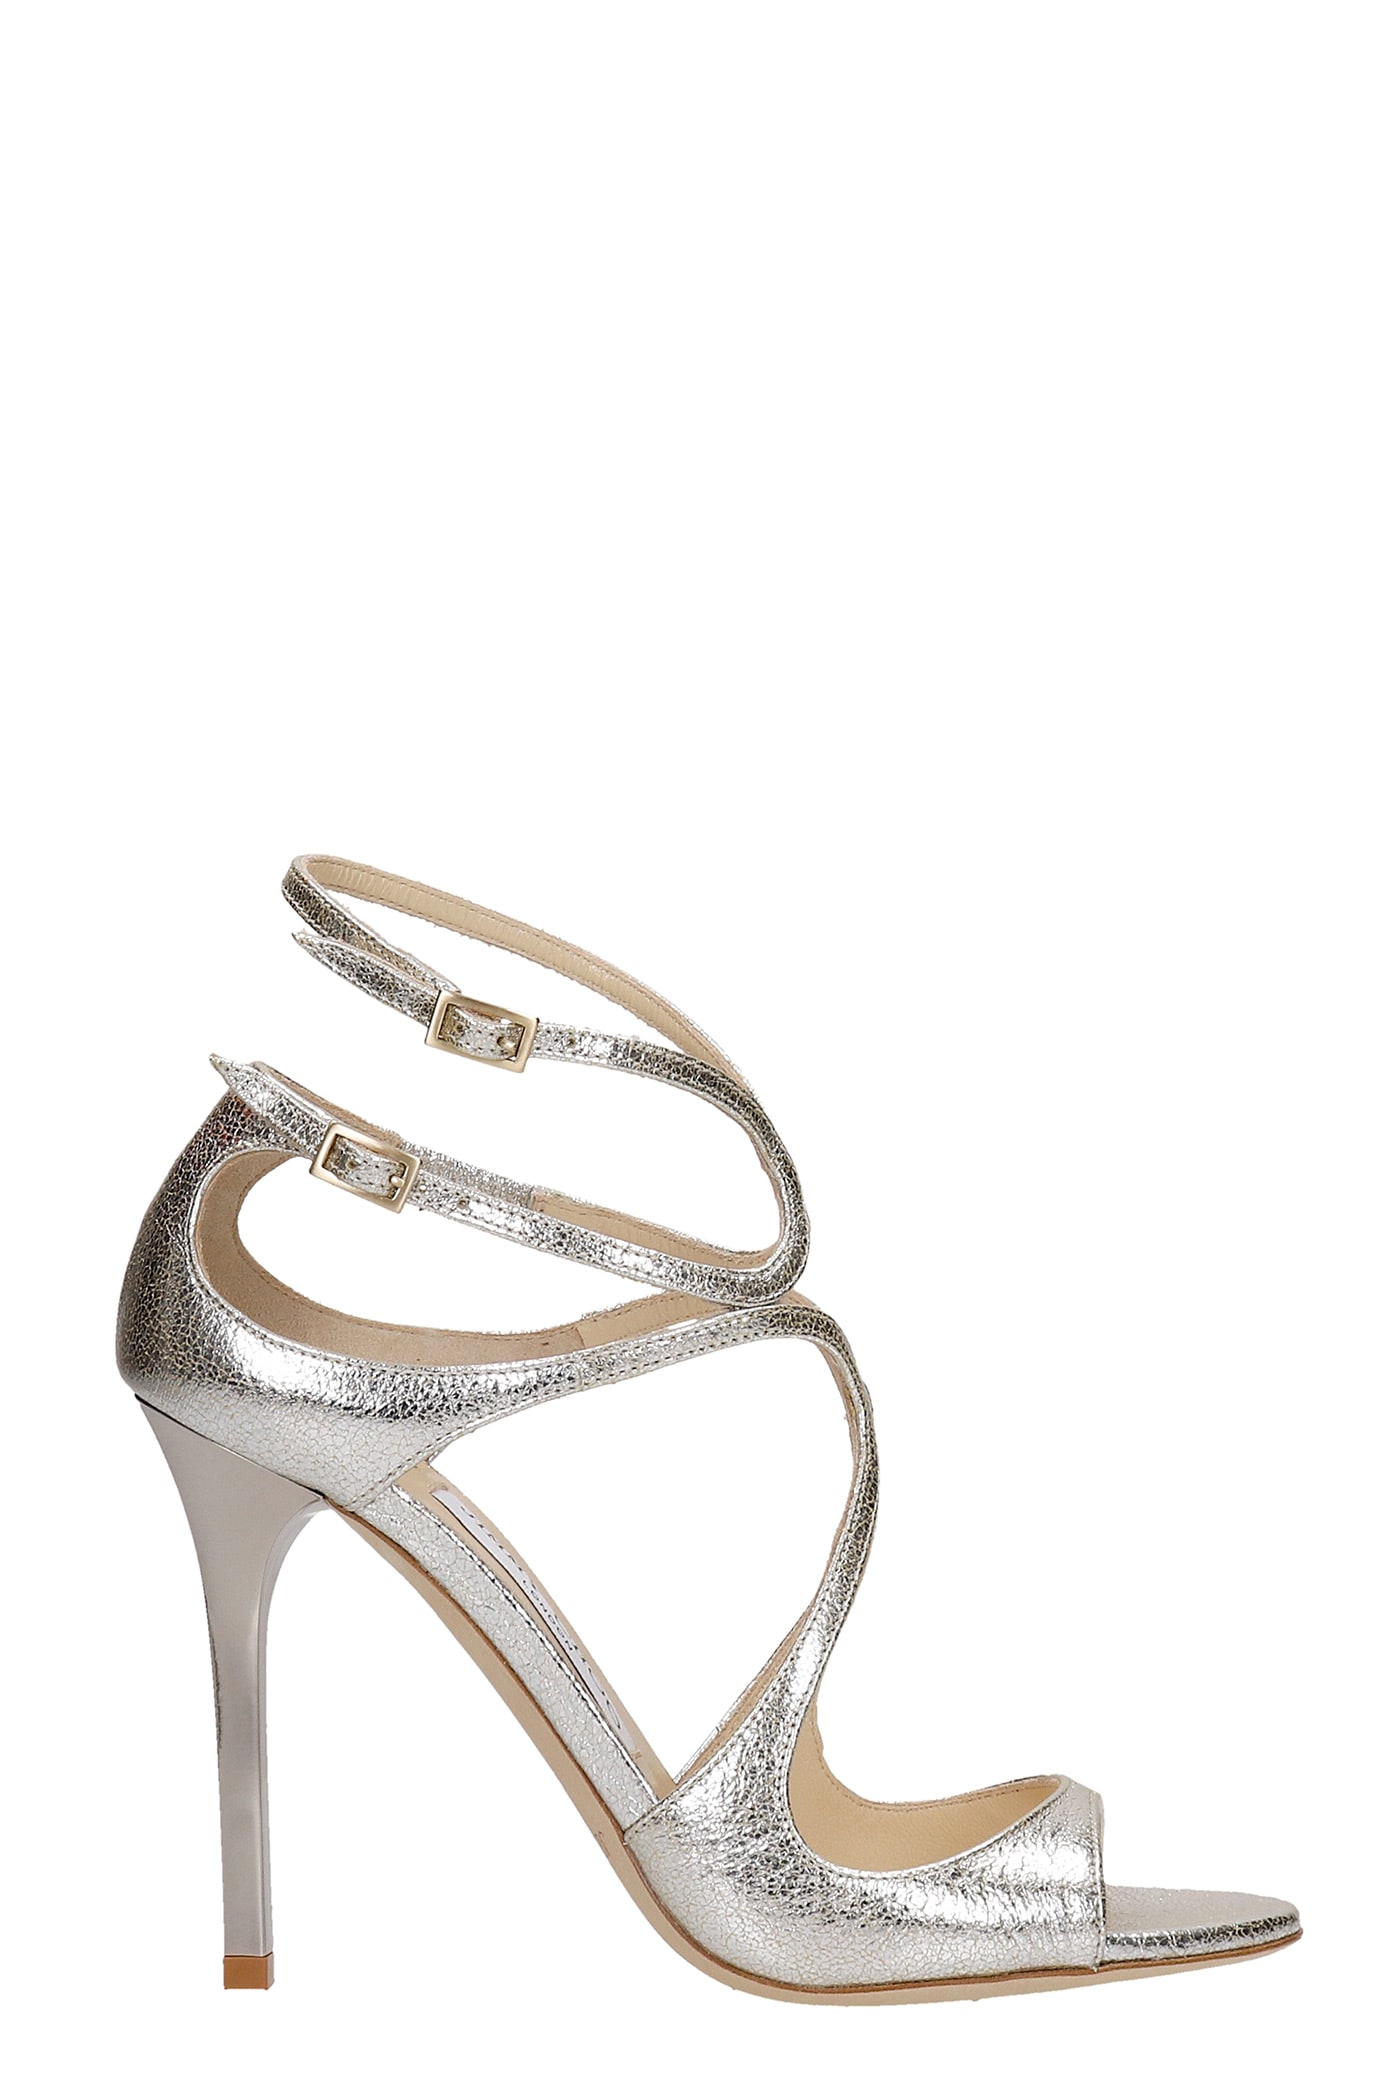 Jimmy Choo Lang Sandals In Platinum Leather